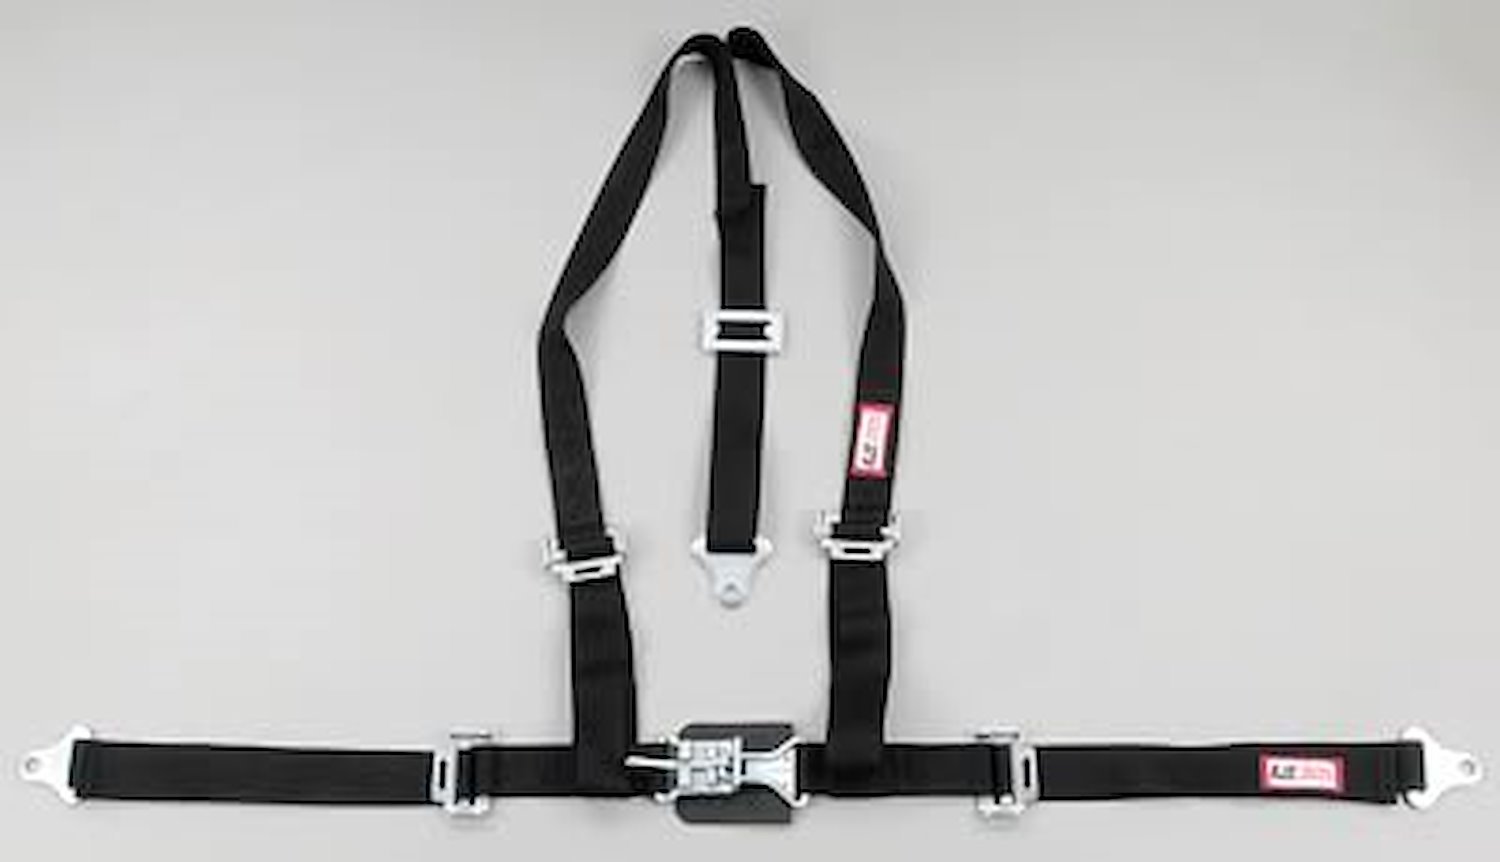 NON-SFI L&L HARNESS 3 PULL DOWN Lap BELT SEWN IN 2 S.H. Y FLOOR Mount ALL WRAP ENDS BLUE